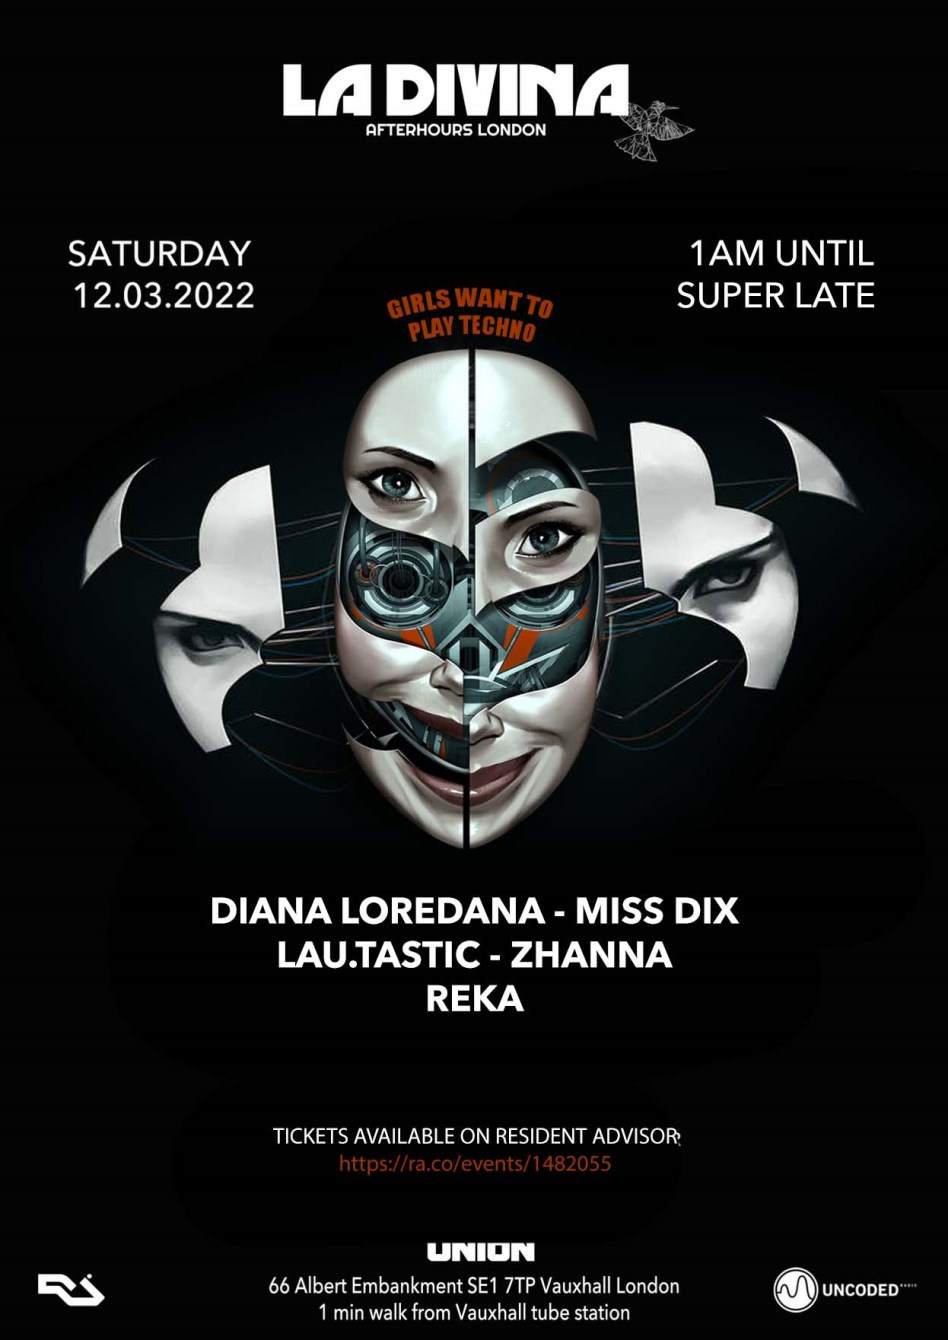 La Divina Afterhours 'Girls Want to Play Techno - Página frontal